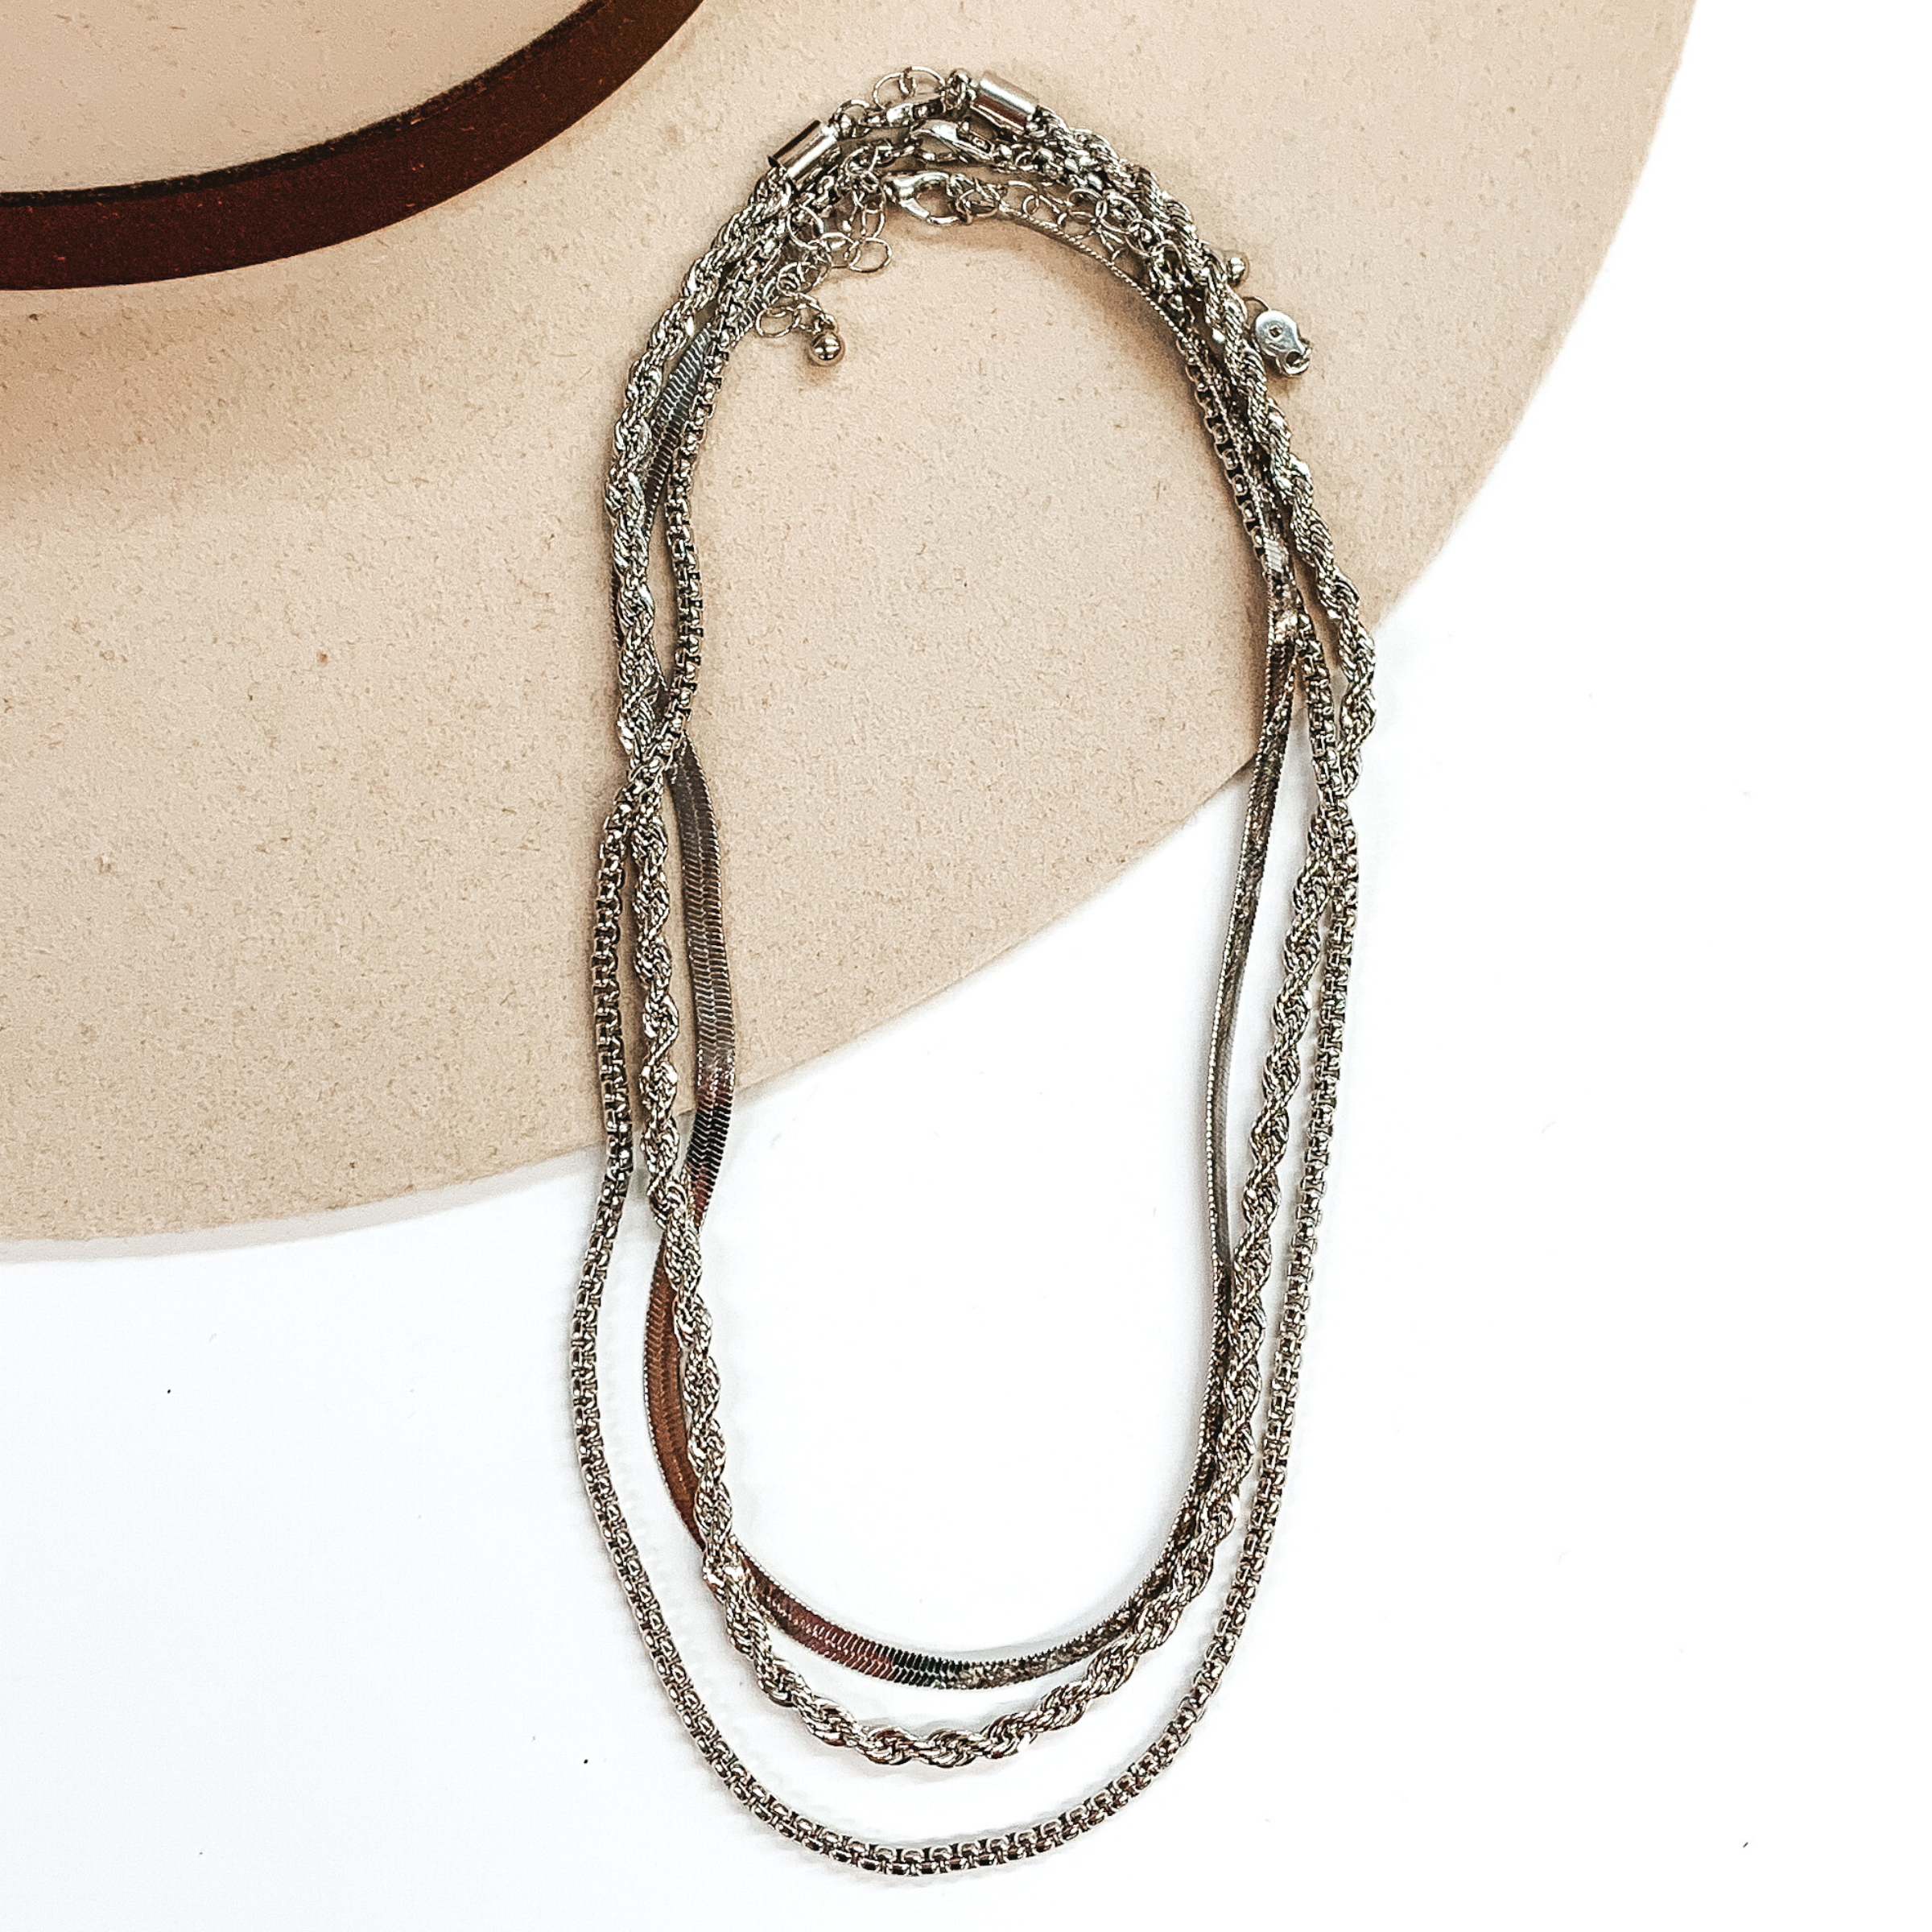 This set of silver necklace include a snake chain, a rope chain, and a box chain necklace. Each necklace has a different length. These necklaces are pictured partially laying on top of a beige hat brim on a white background.